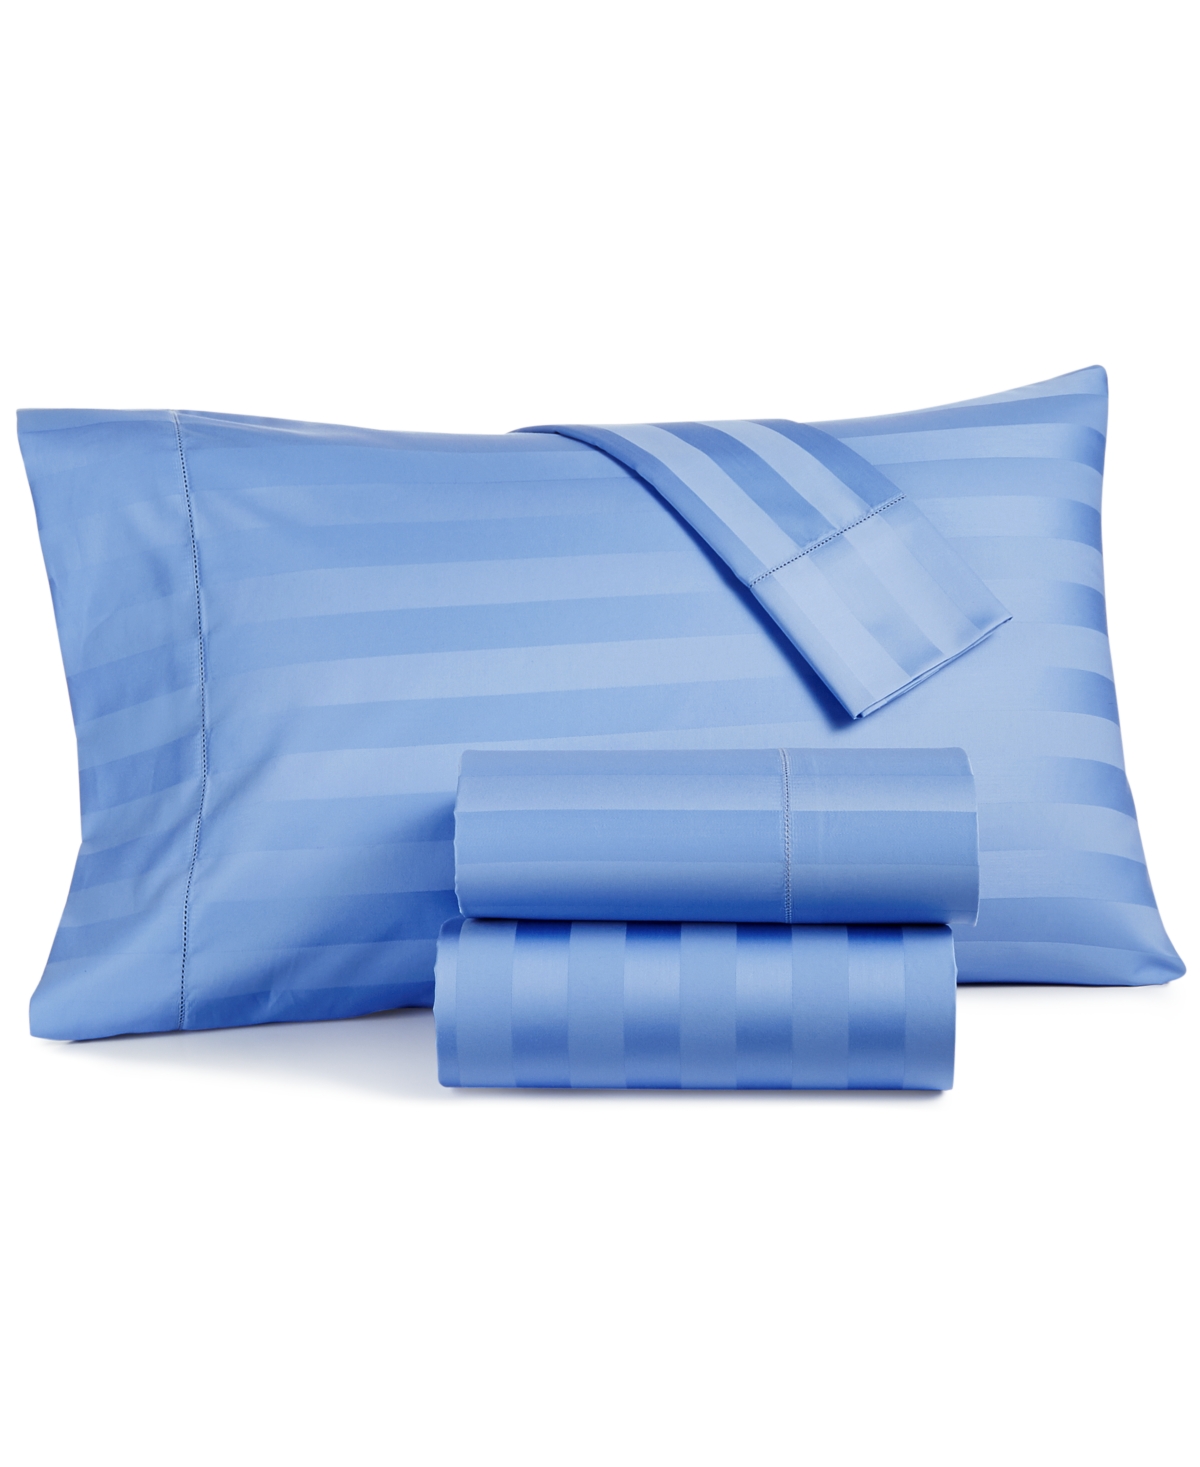 Charter Club Damask 1.5" Stripe 550 Thread Count 100% Cotton 3-pc. Sheet Set, Twin, Created For Macy's In Cornflower